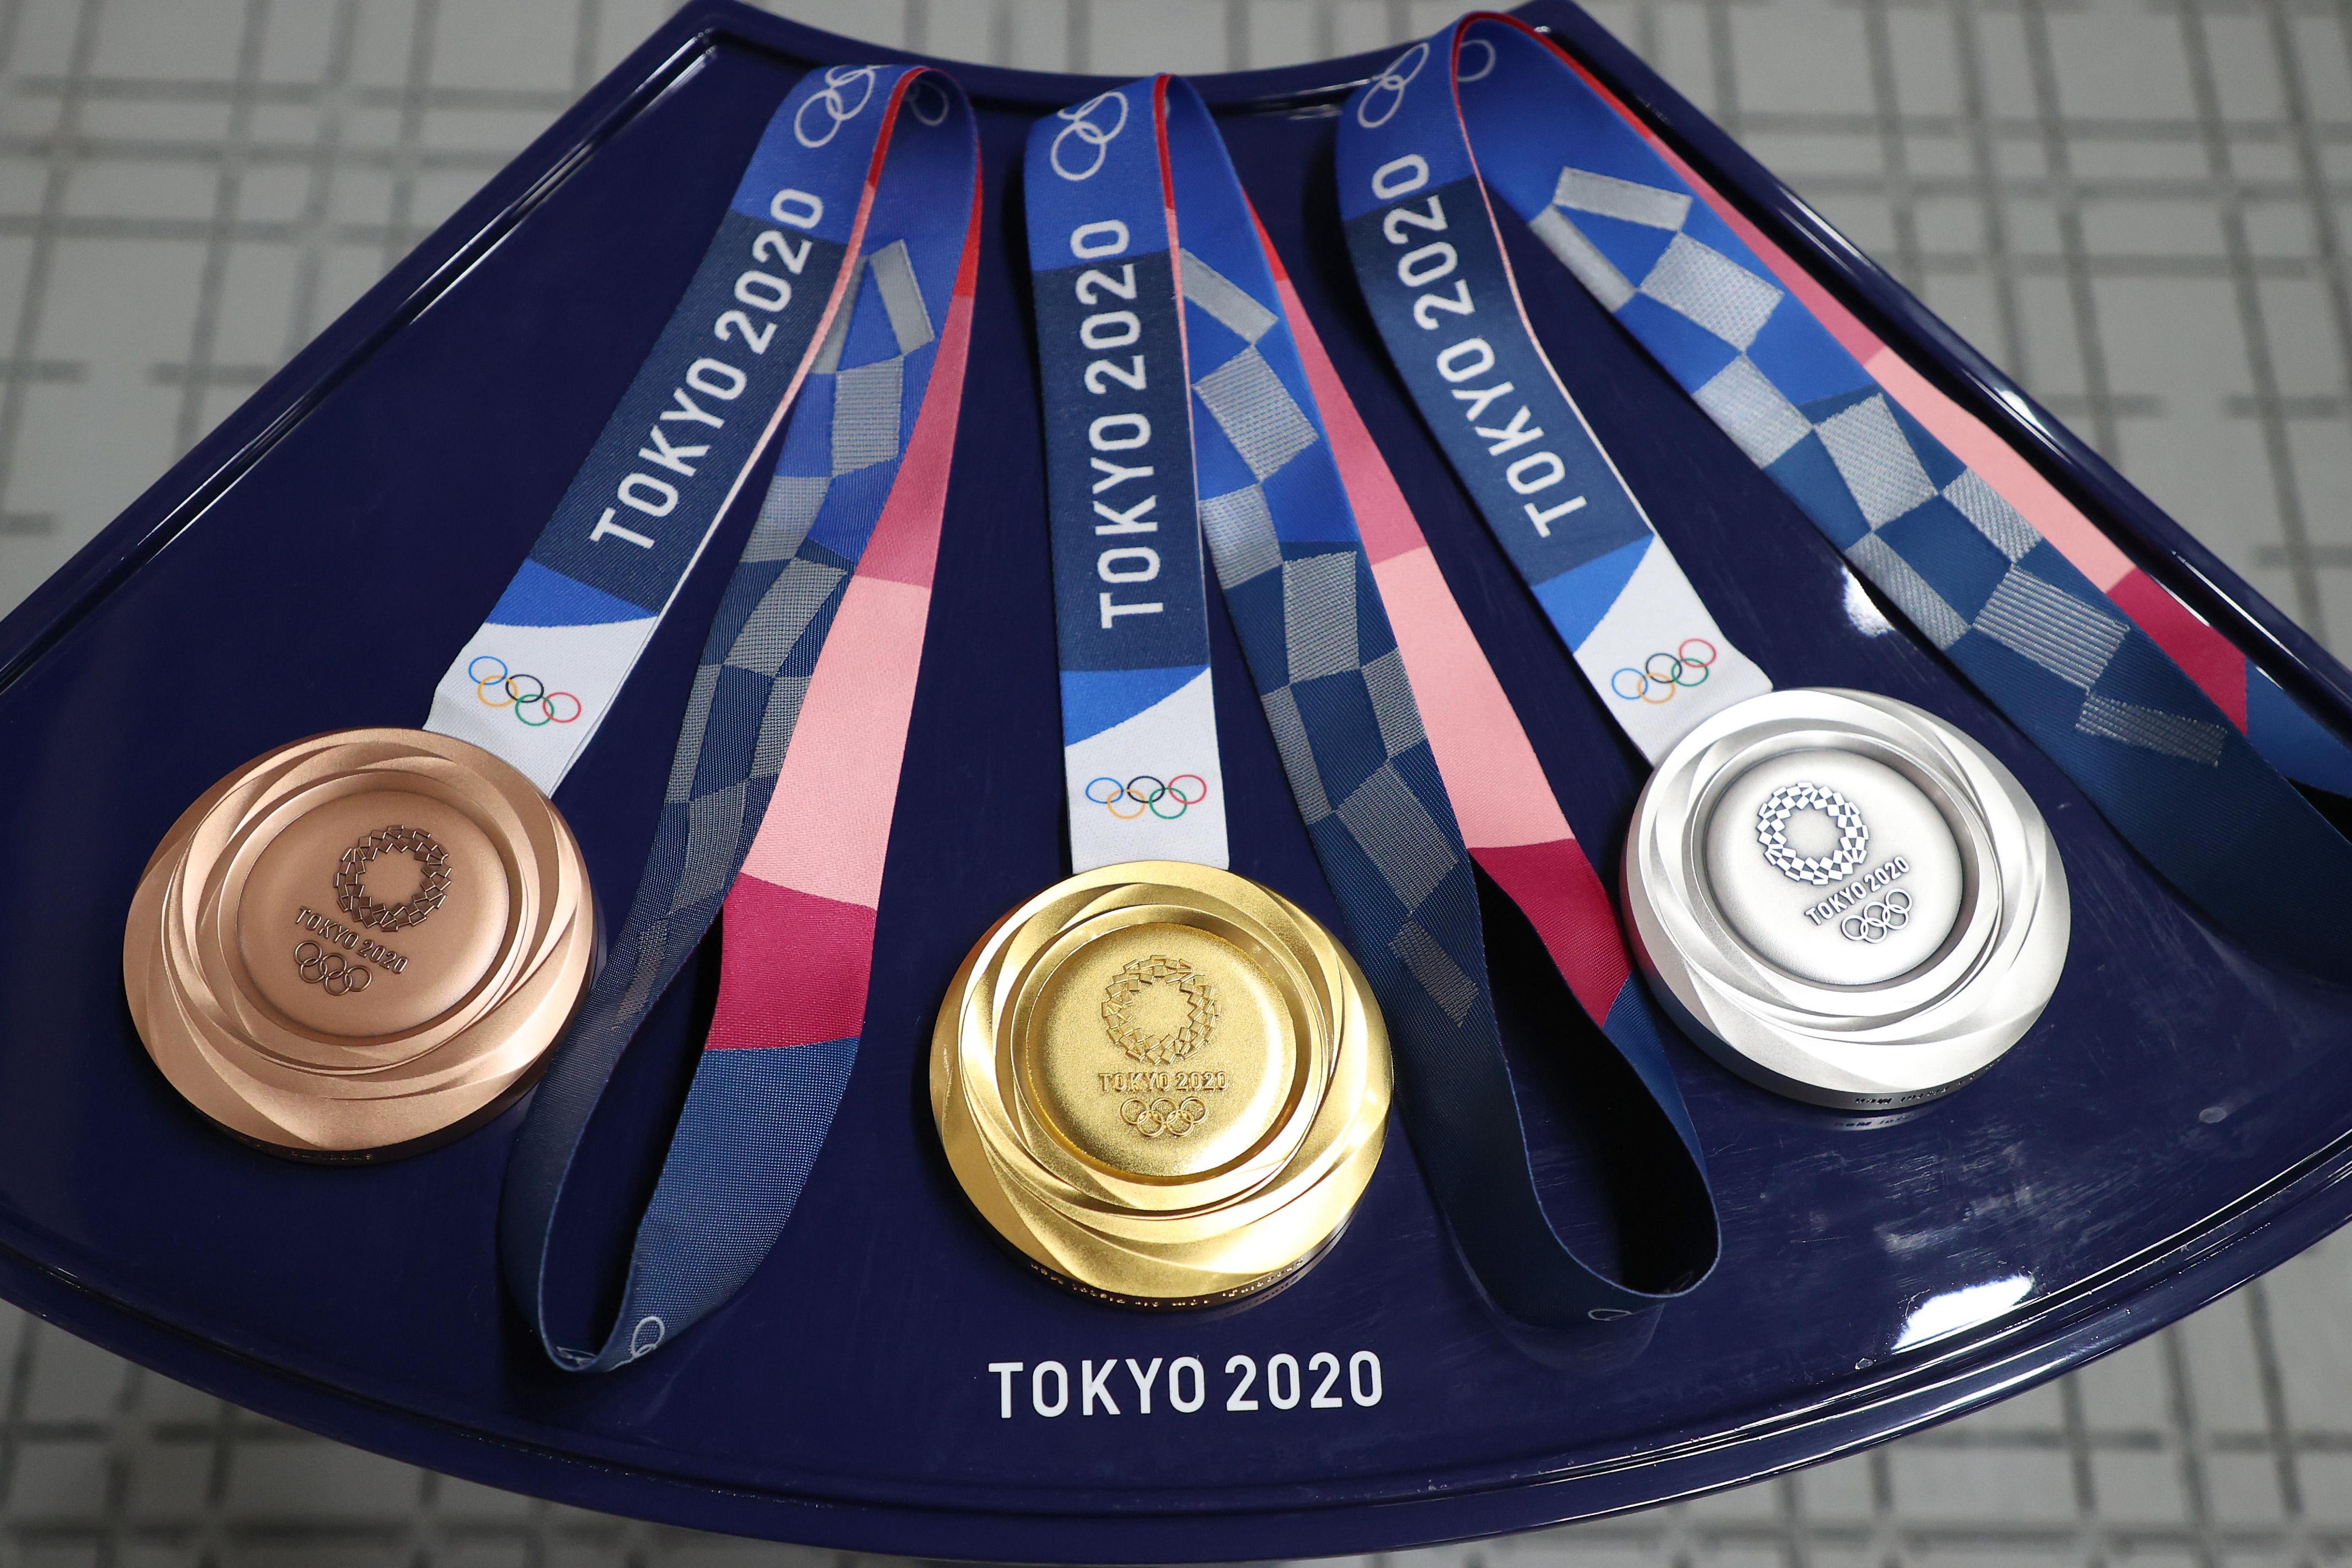 L-R: a bronze, gold, and silver medal from the Tokyo Olympics sitting on a platter.